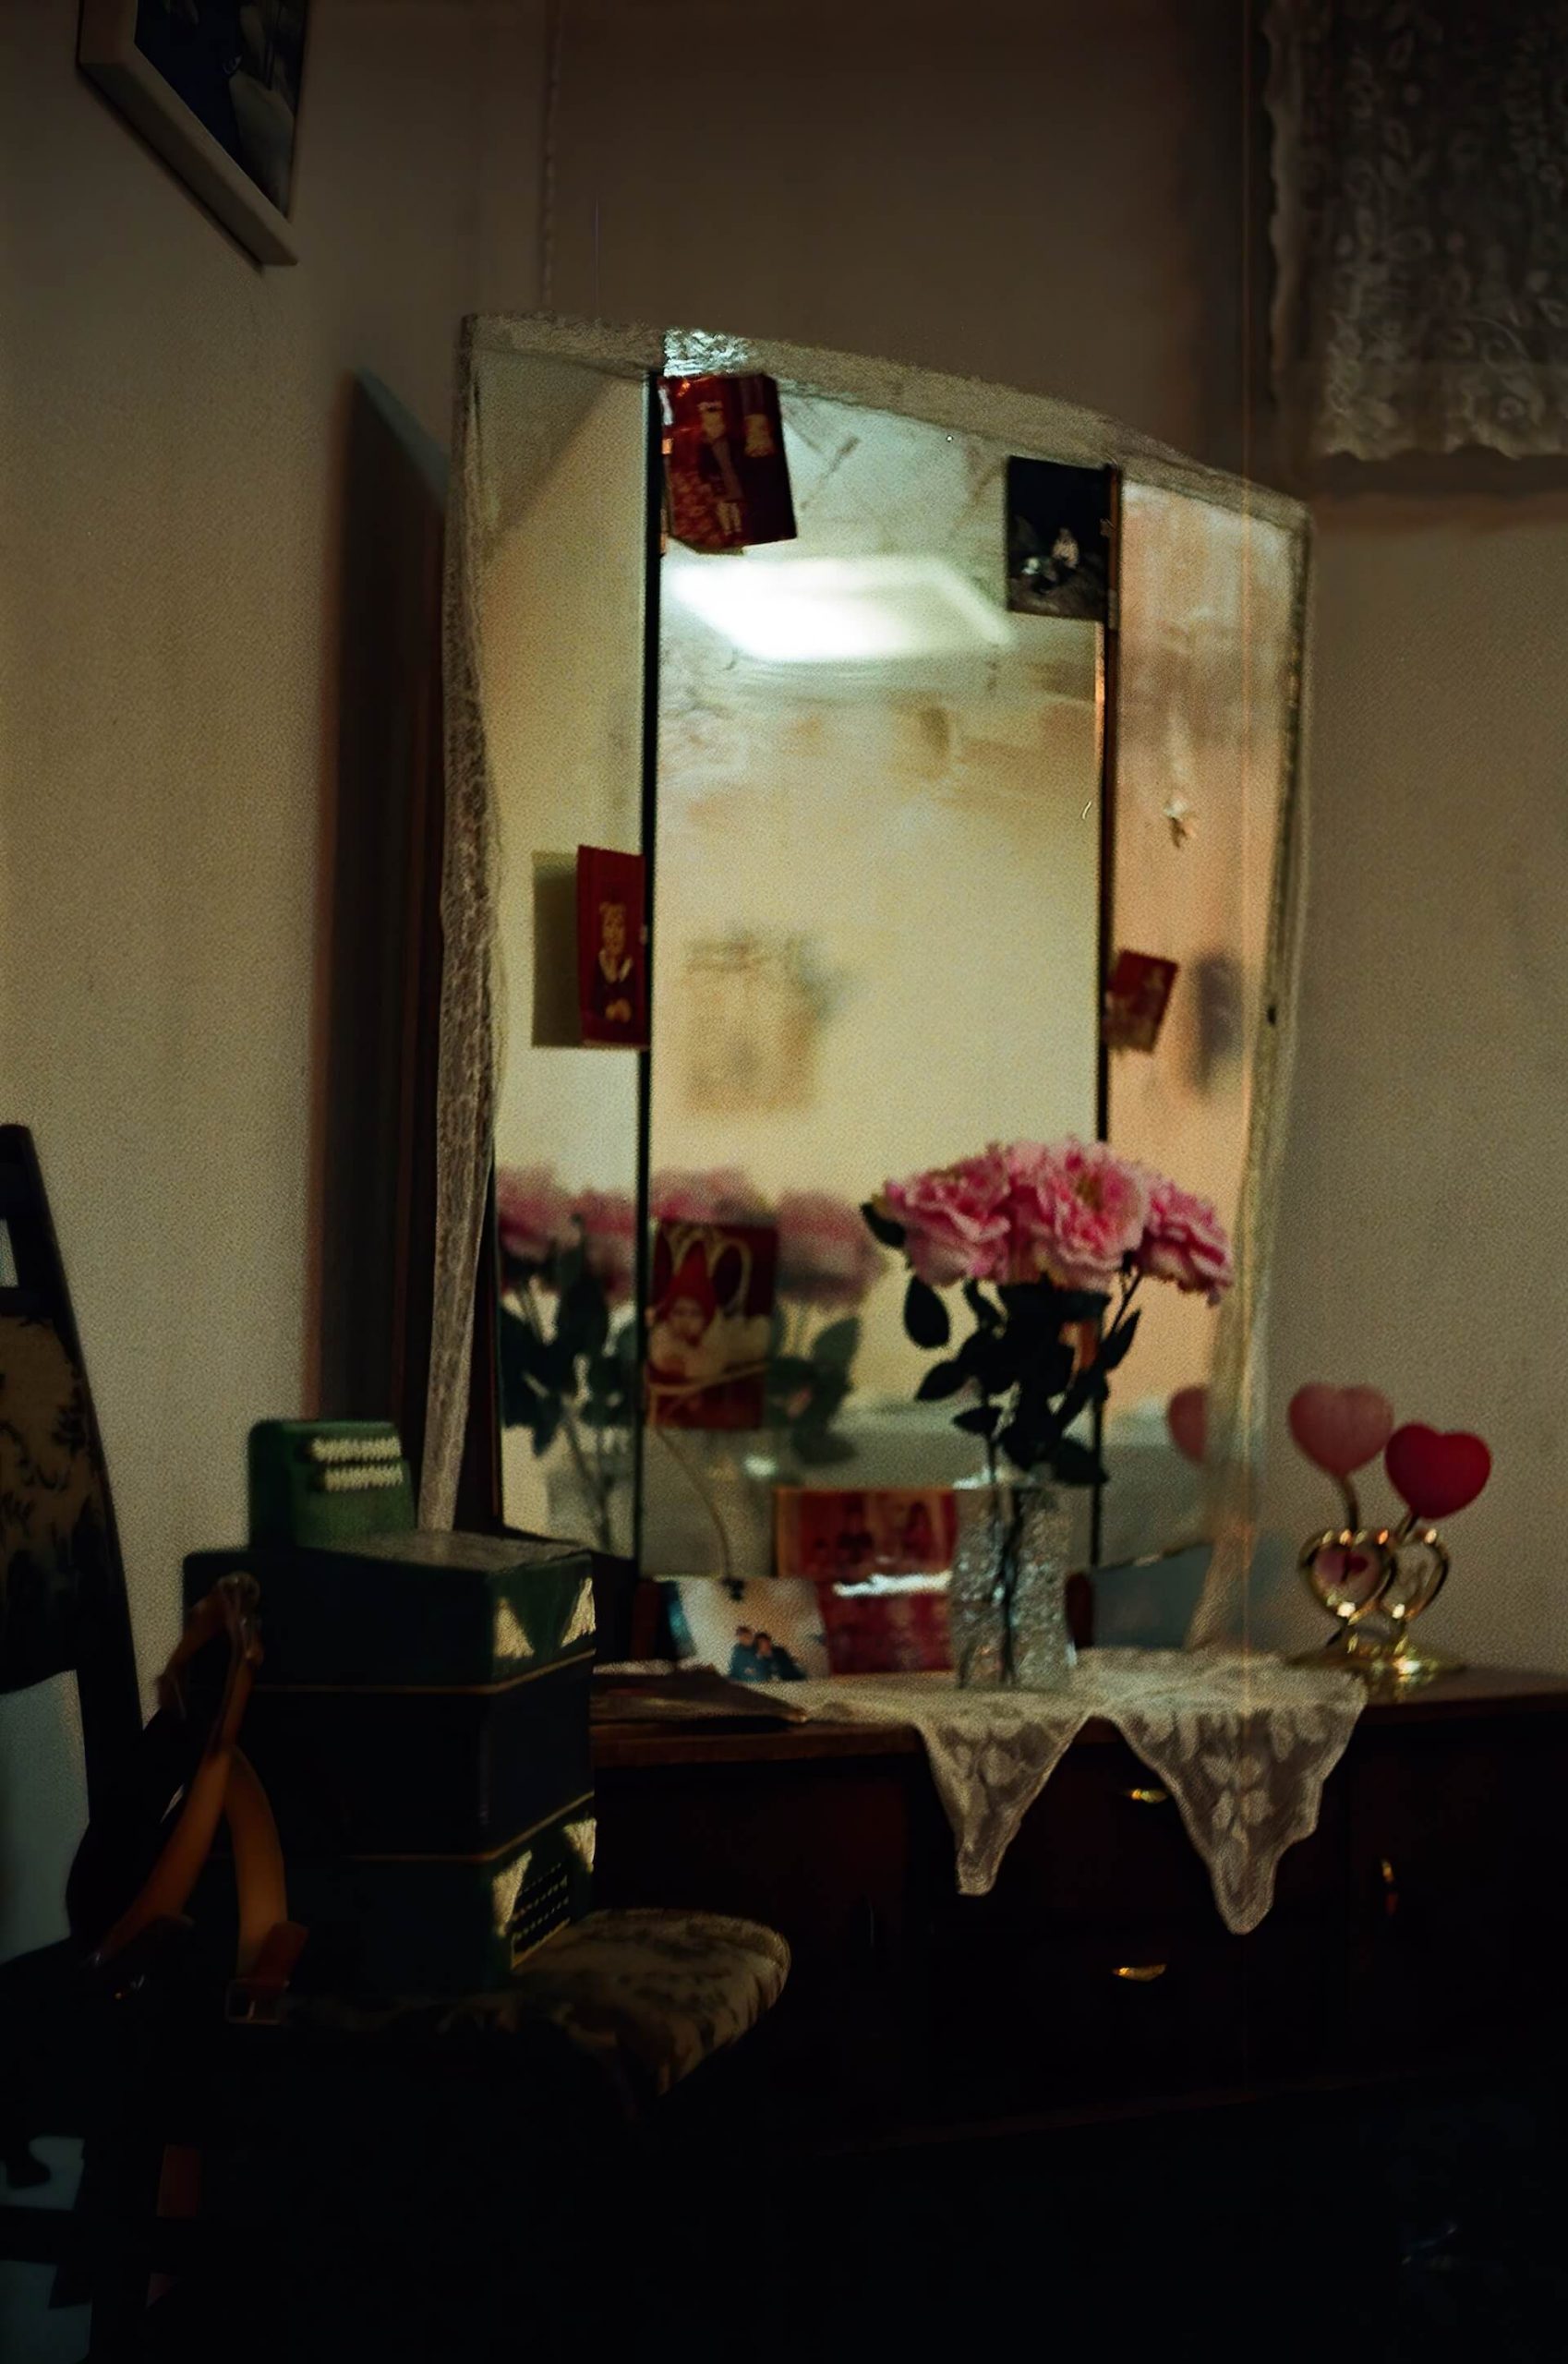 Three sided mirror stands on top of a dressing table. There are some photos of young children on the mirror. There is a glass vase with pink roses in the middle of the dressing table.